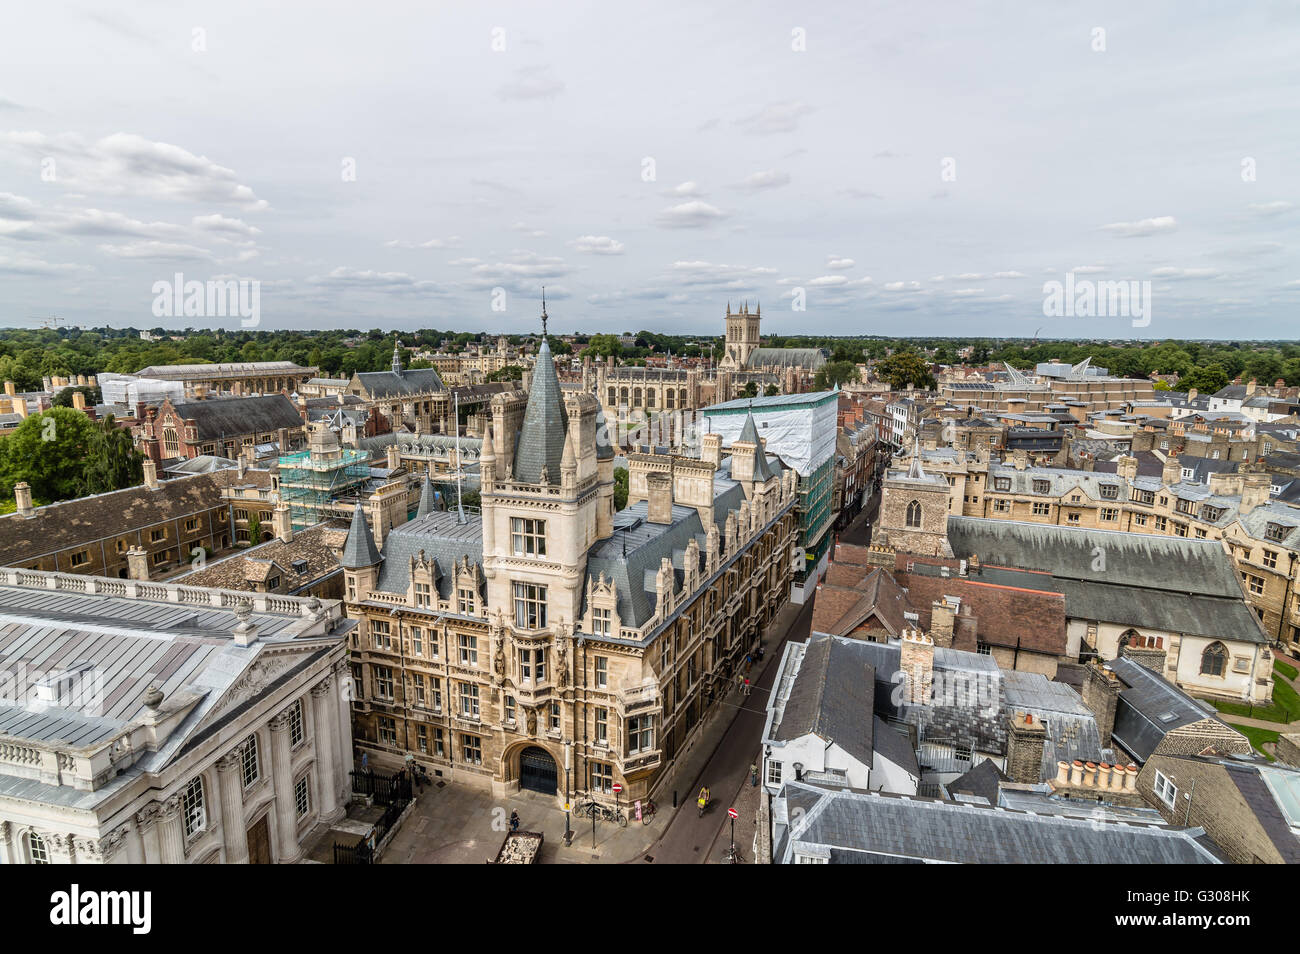 High angle view of the city of Cambridge, UK Stock Photo